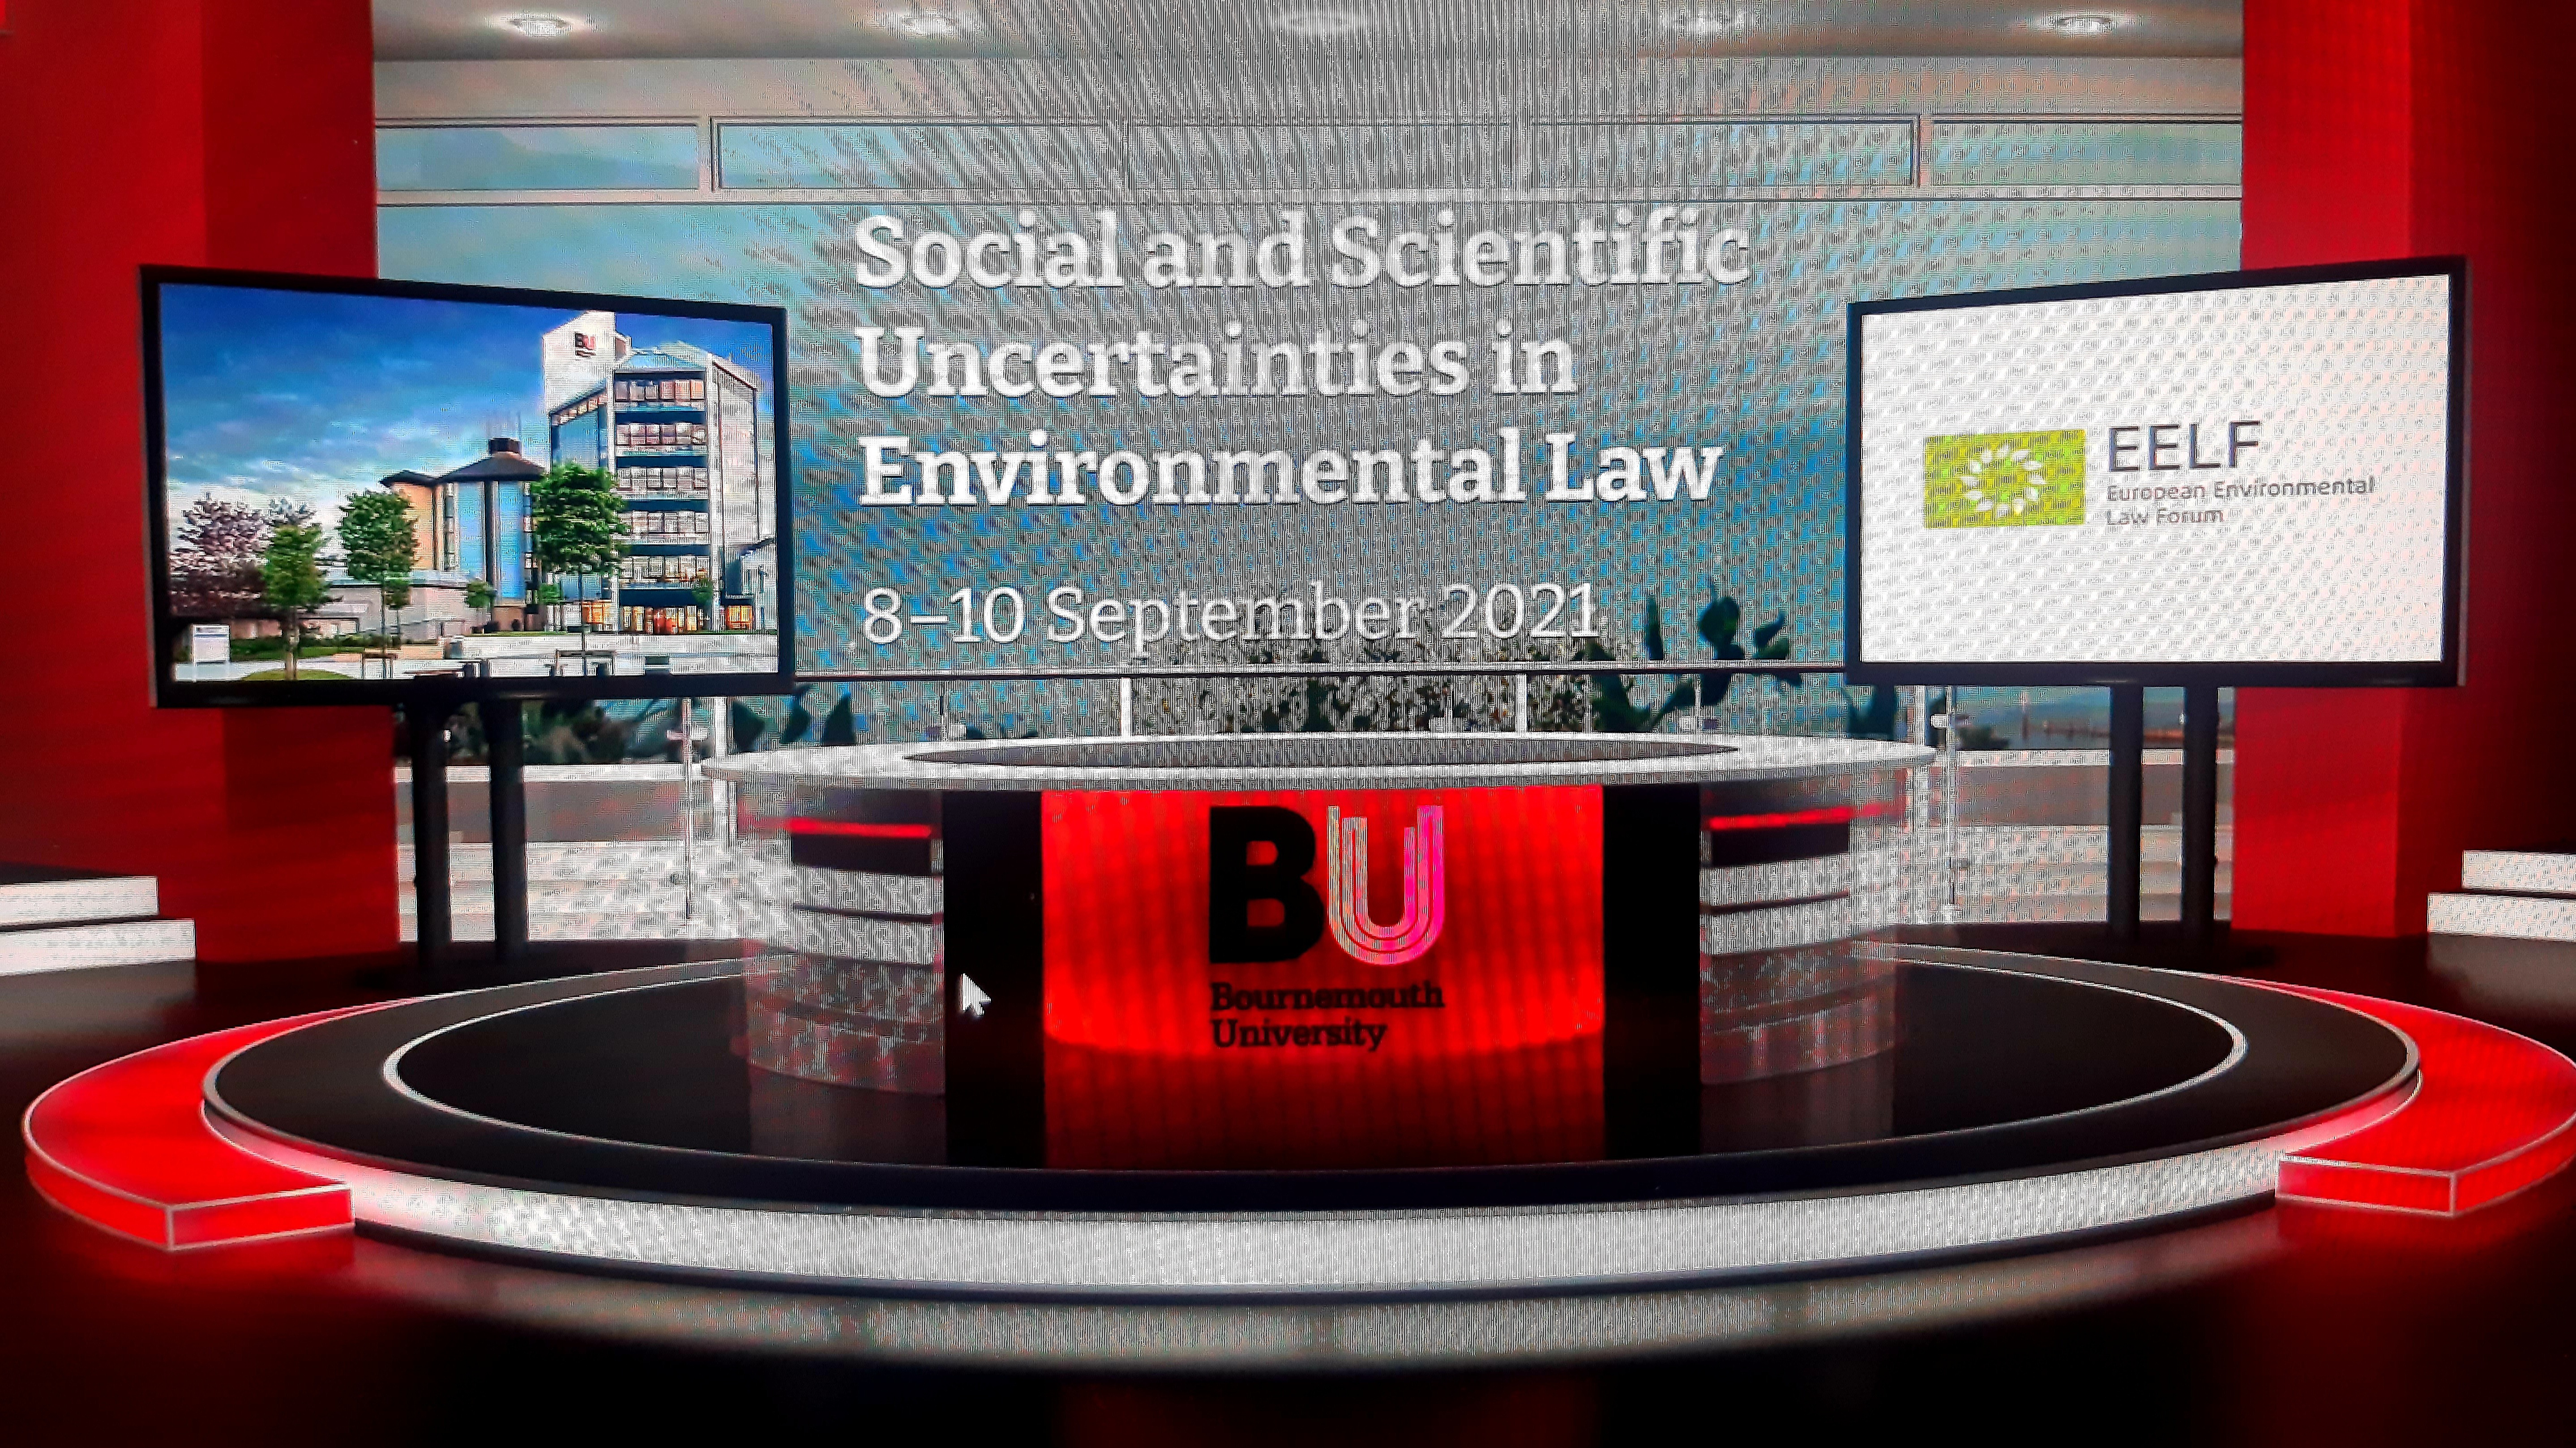 Centre for Law & the Environment Researchers Participate at EELF Annual Conference 2021